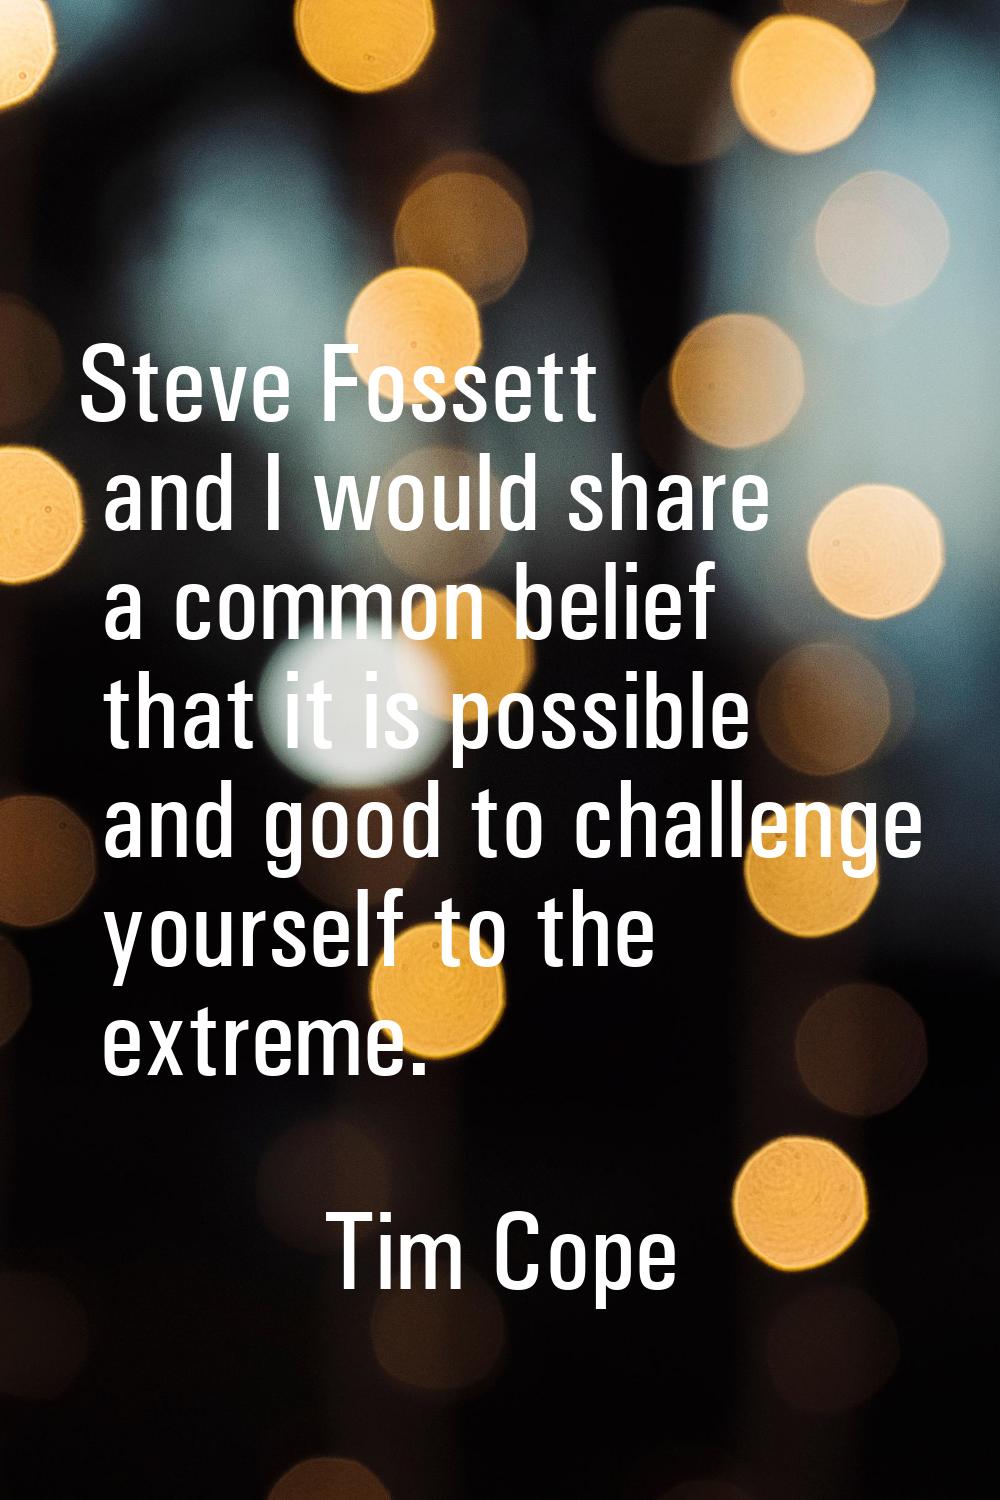 Steve Fossett and I would share a common belief that it is possible and good to challenge yourself 